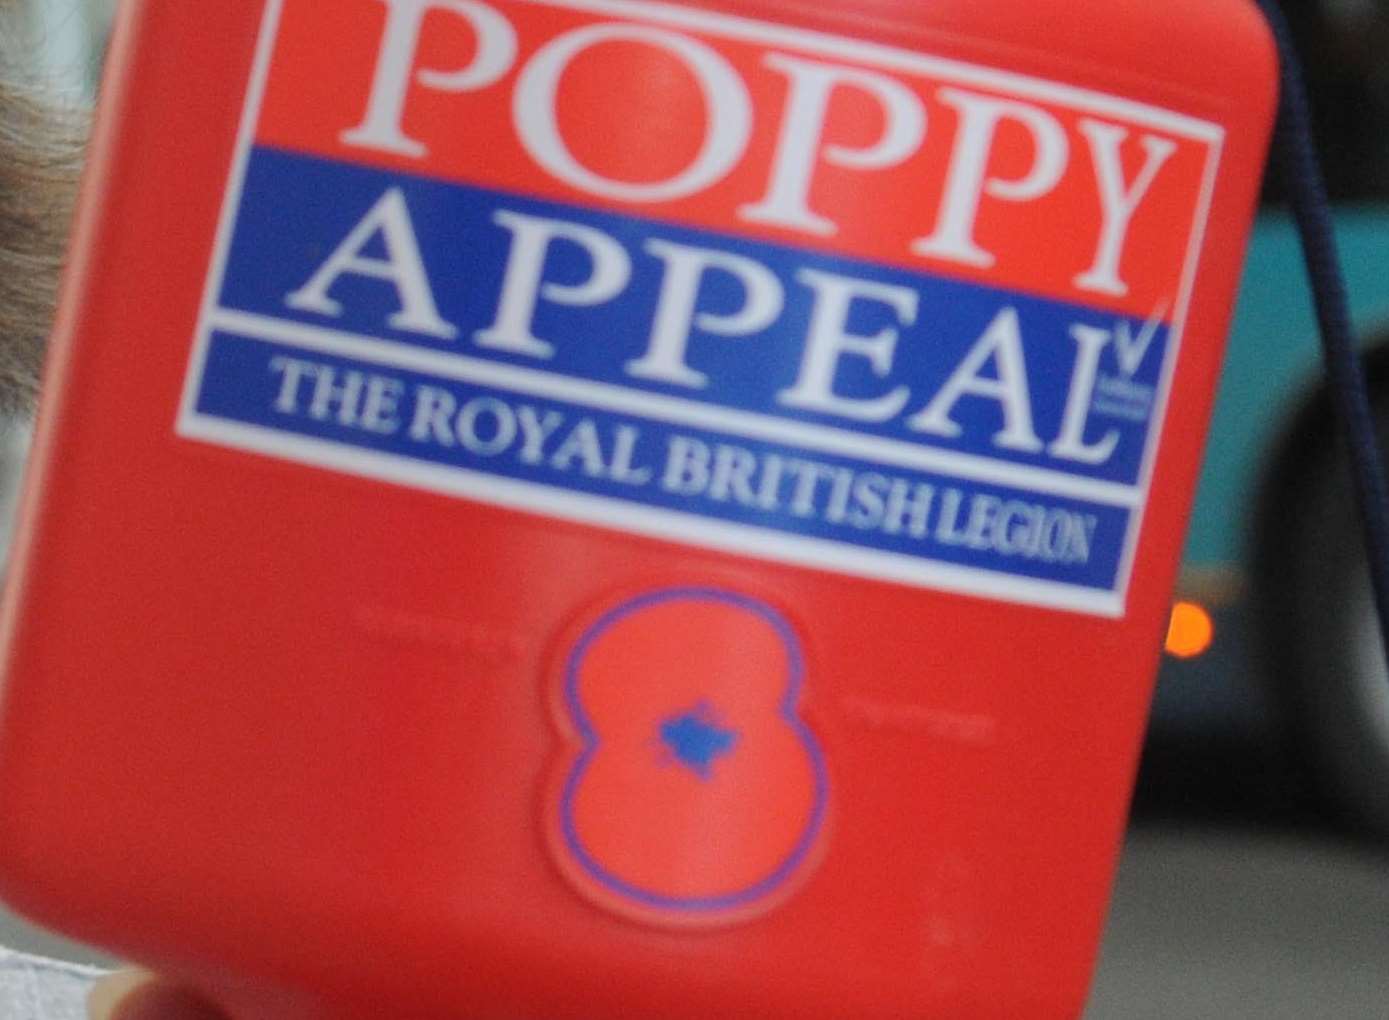 The Poppy Appeal collection pot was taken sometime between between 3.30pm on Friday, November 28 and Sunday, November 30